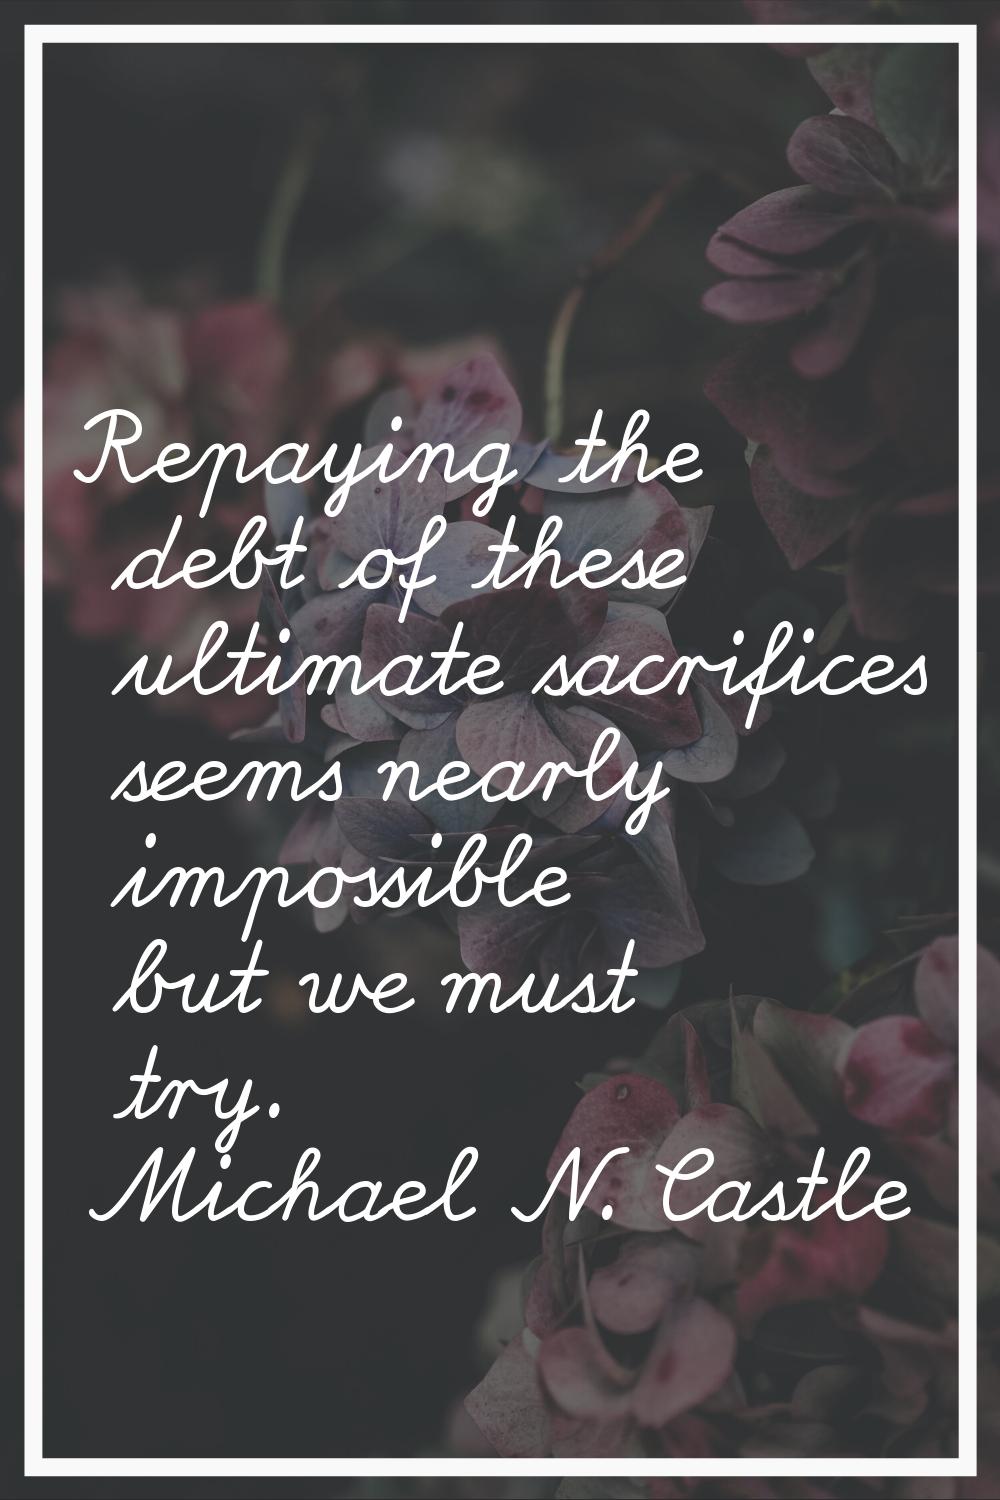 Repaying the debt of these ultimate sacrifices seems nearly impossible but we must try.